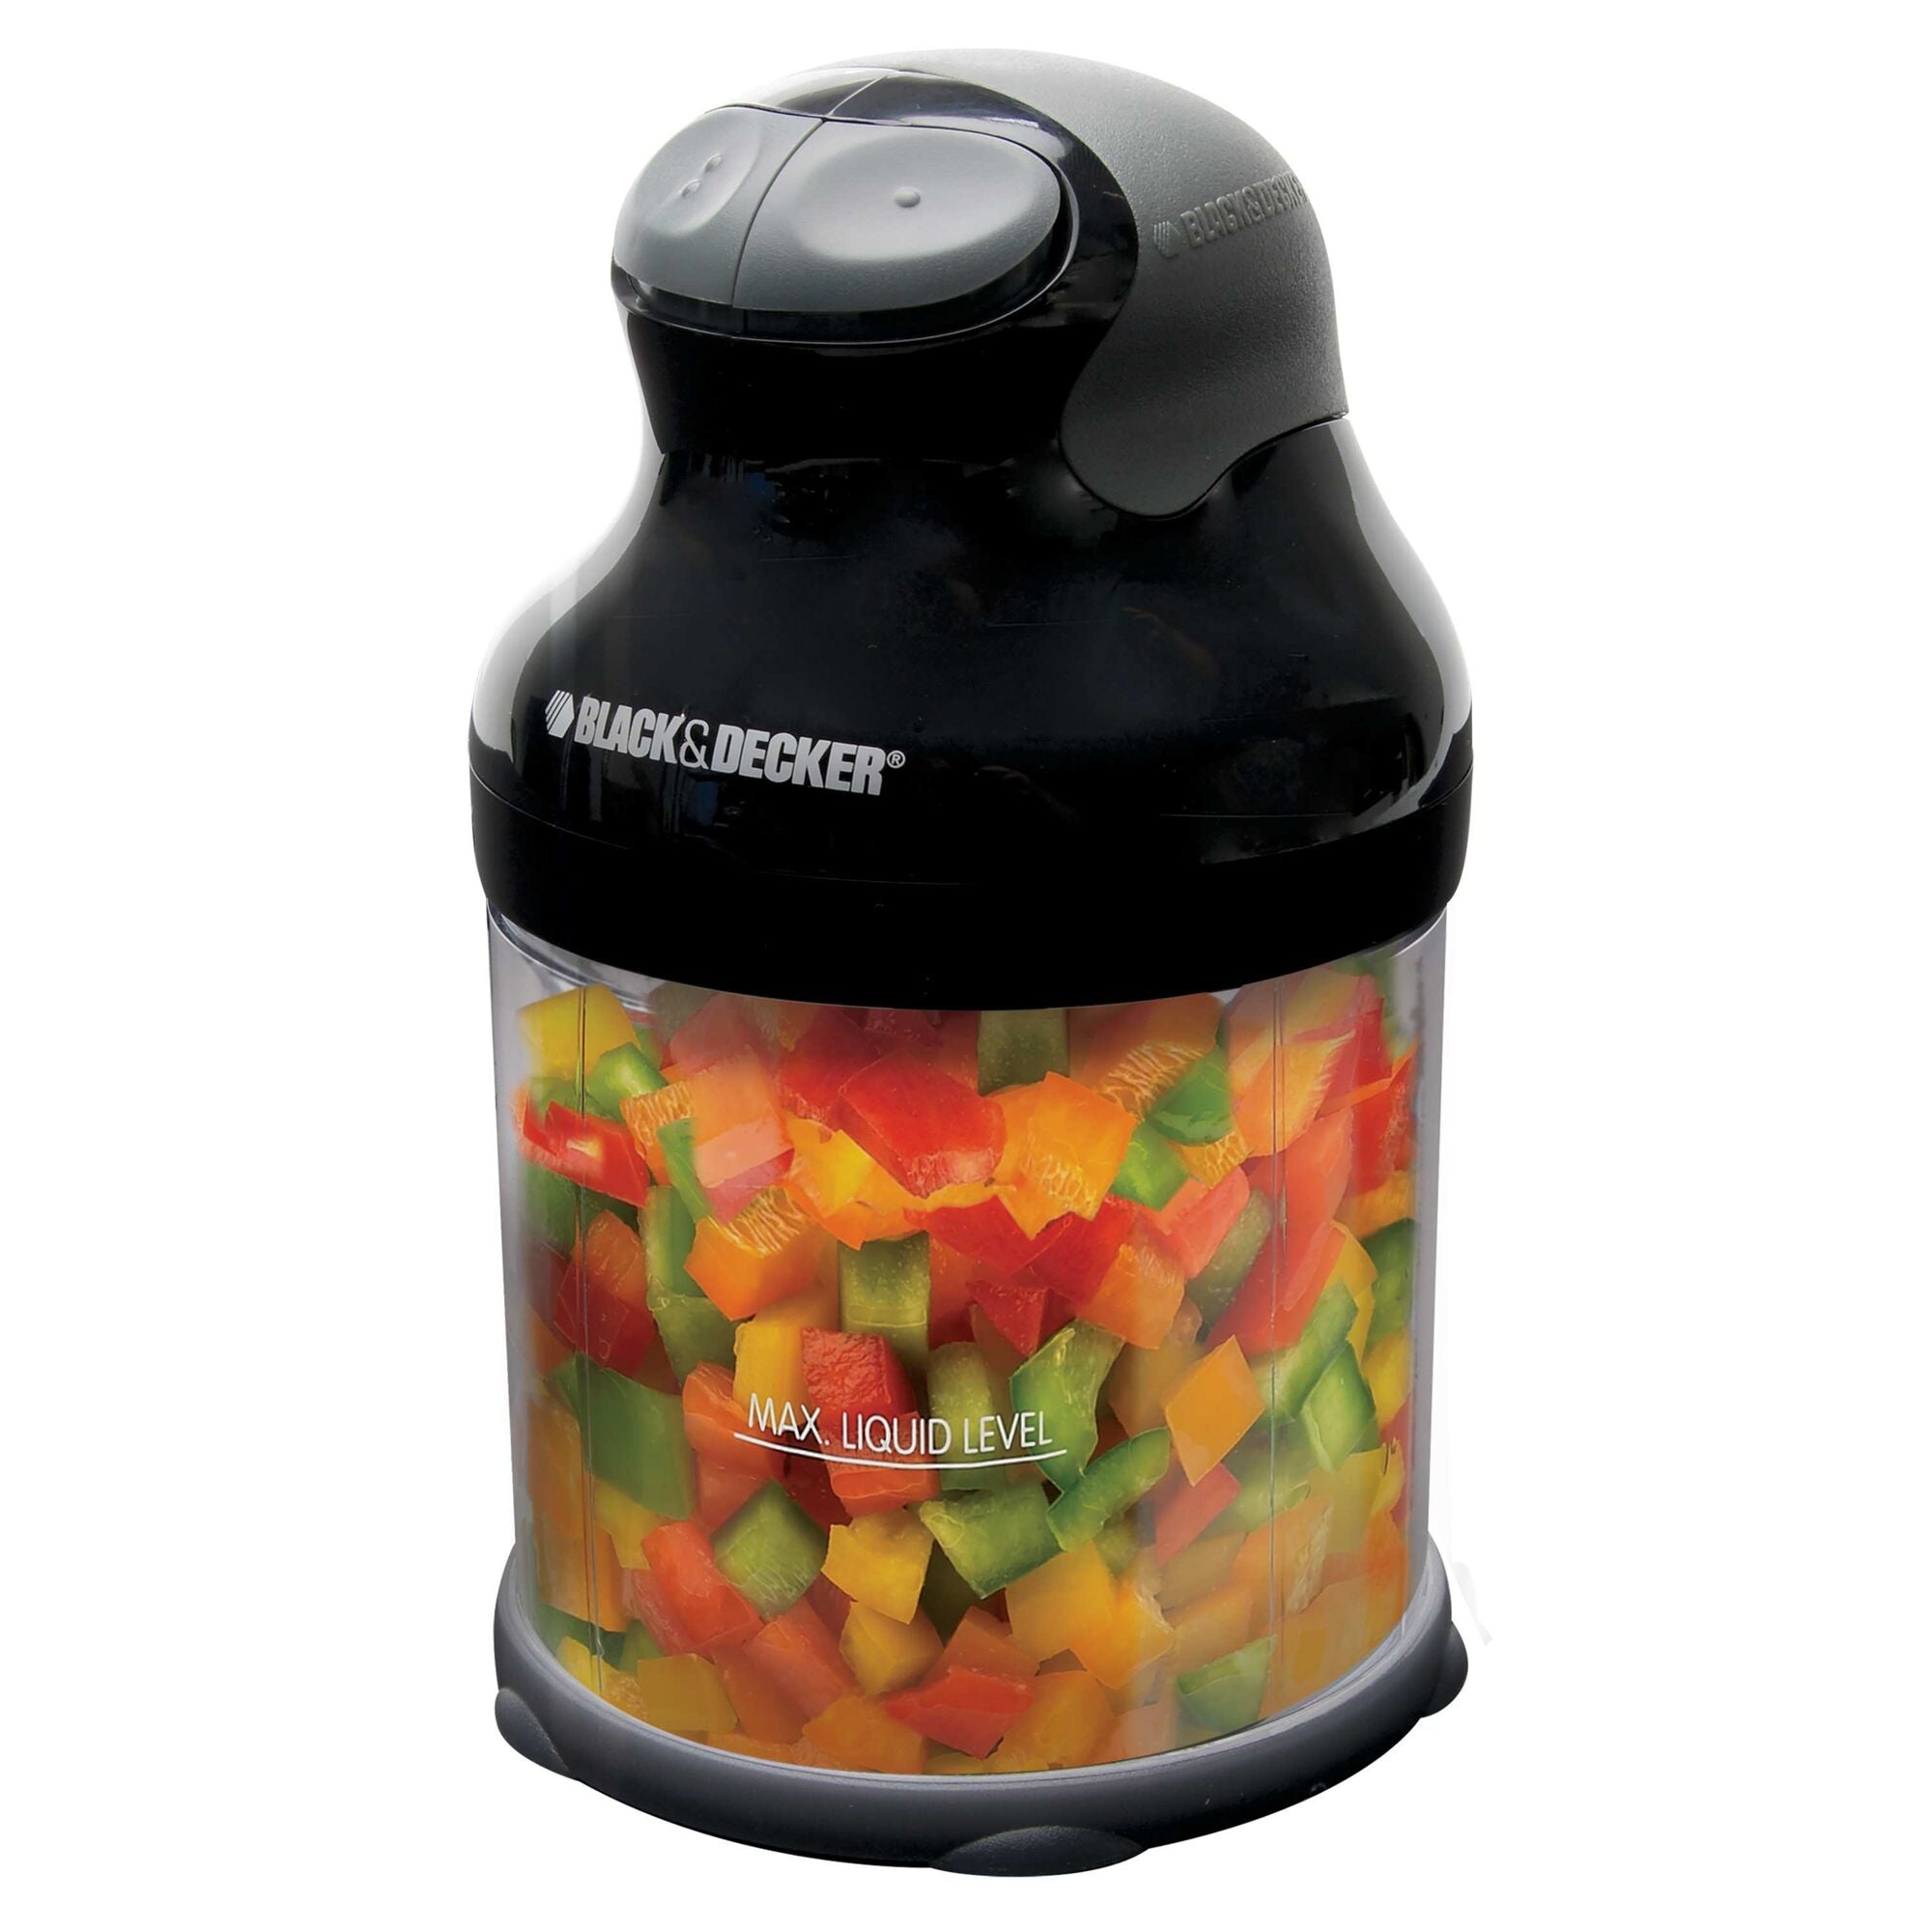 Black + Decker 3-Cup One-Touch Electric Chopper with Lid